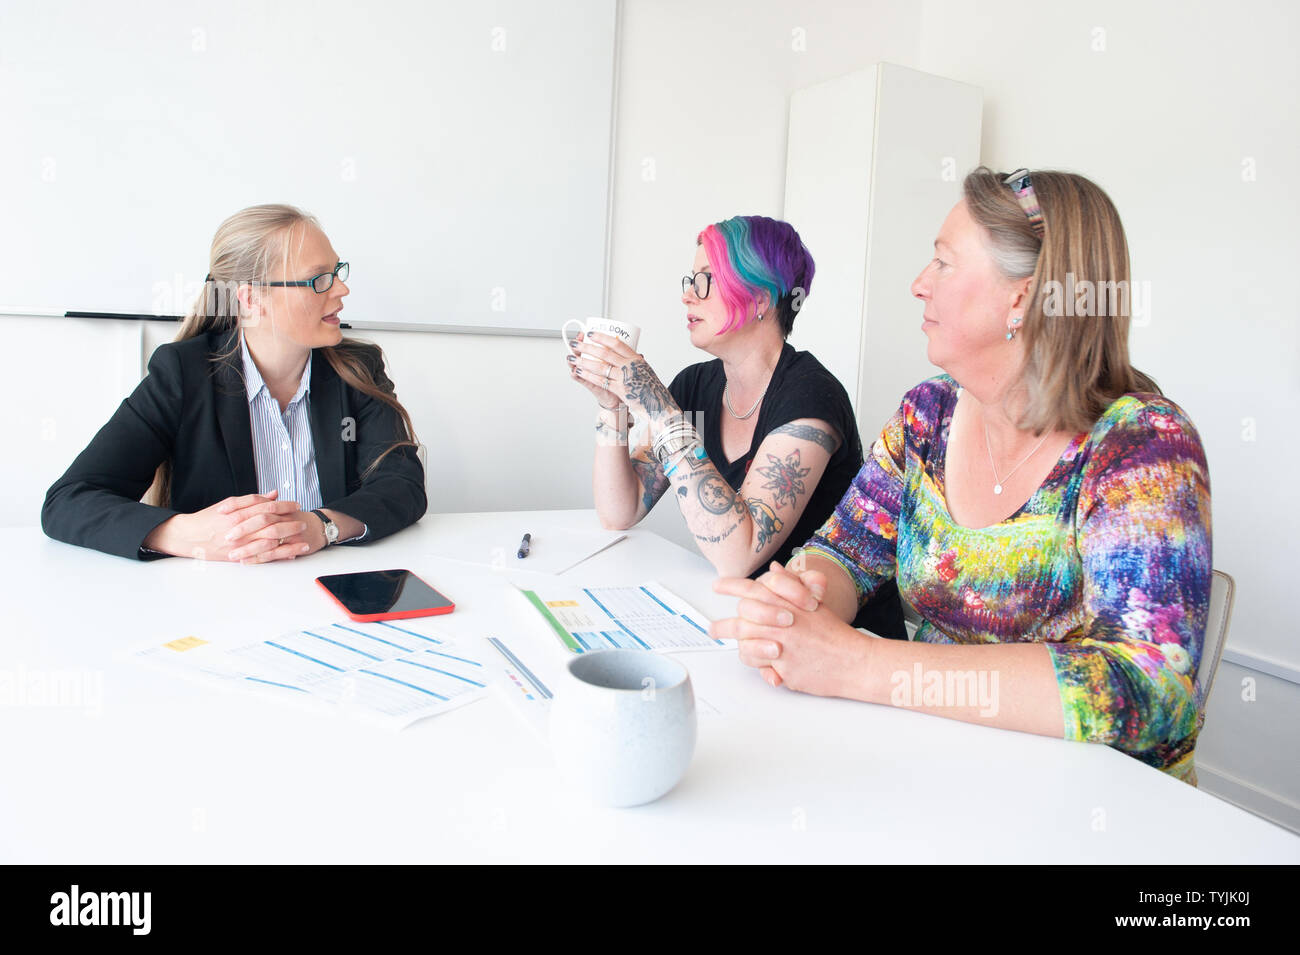 Three women in informal business setting in discussion with paperwork Stock Photo